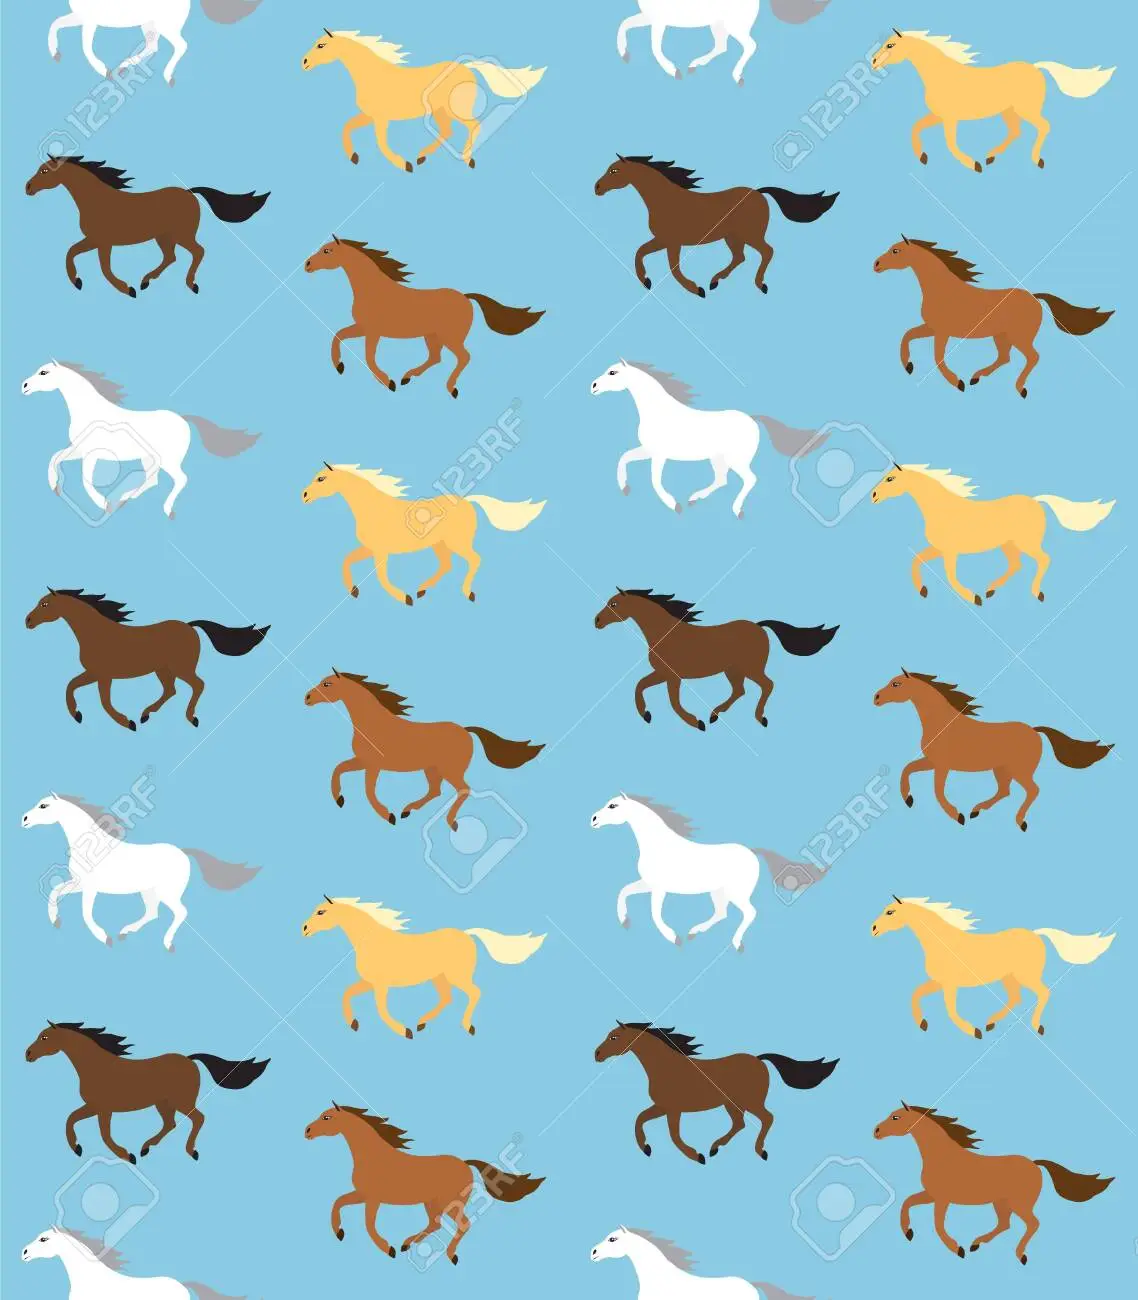 Seamless pattern of flat cartoon different colored horses isolated on blue background royalty free svg cliparts vectors and stock illustration image